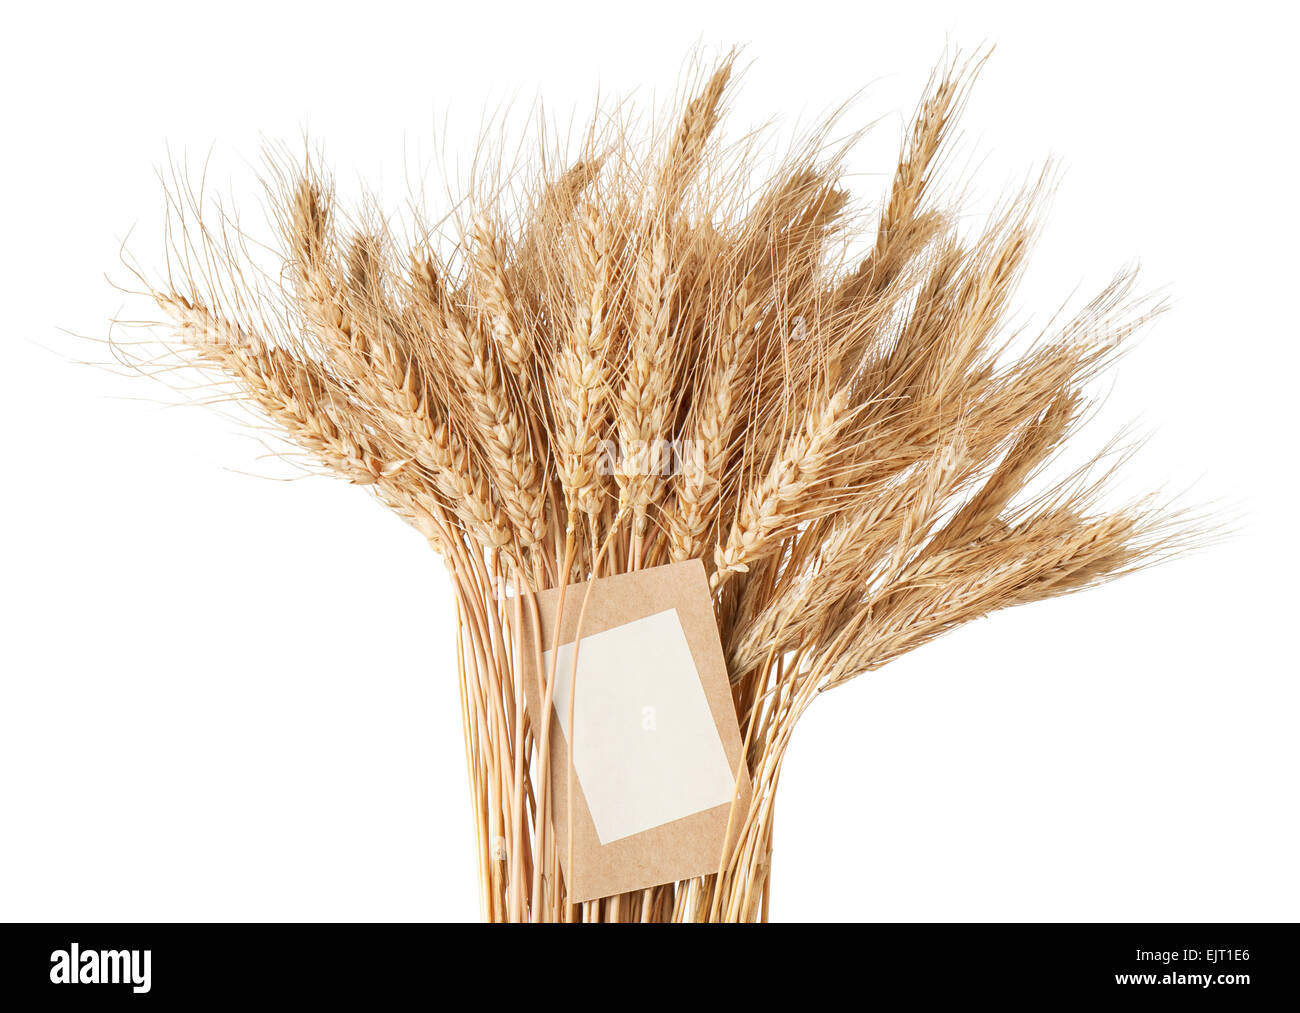 sheaf of wheat with a price tag on a white background Stock Photo